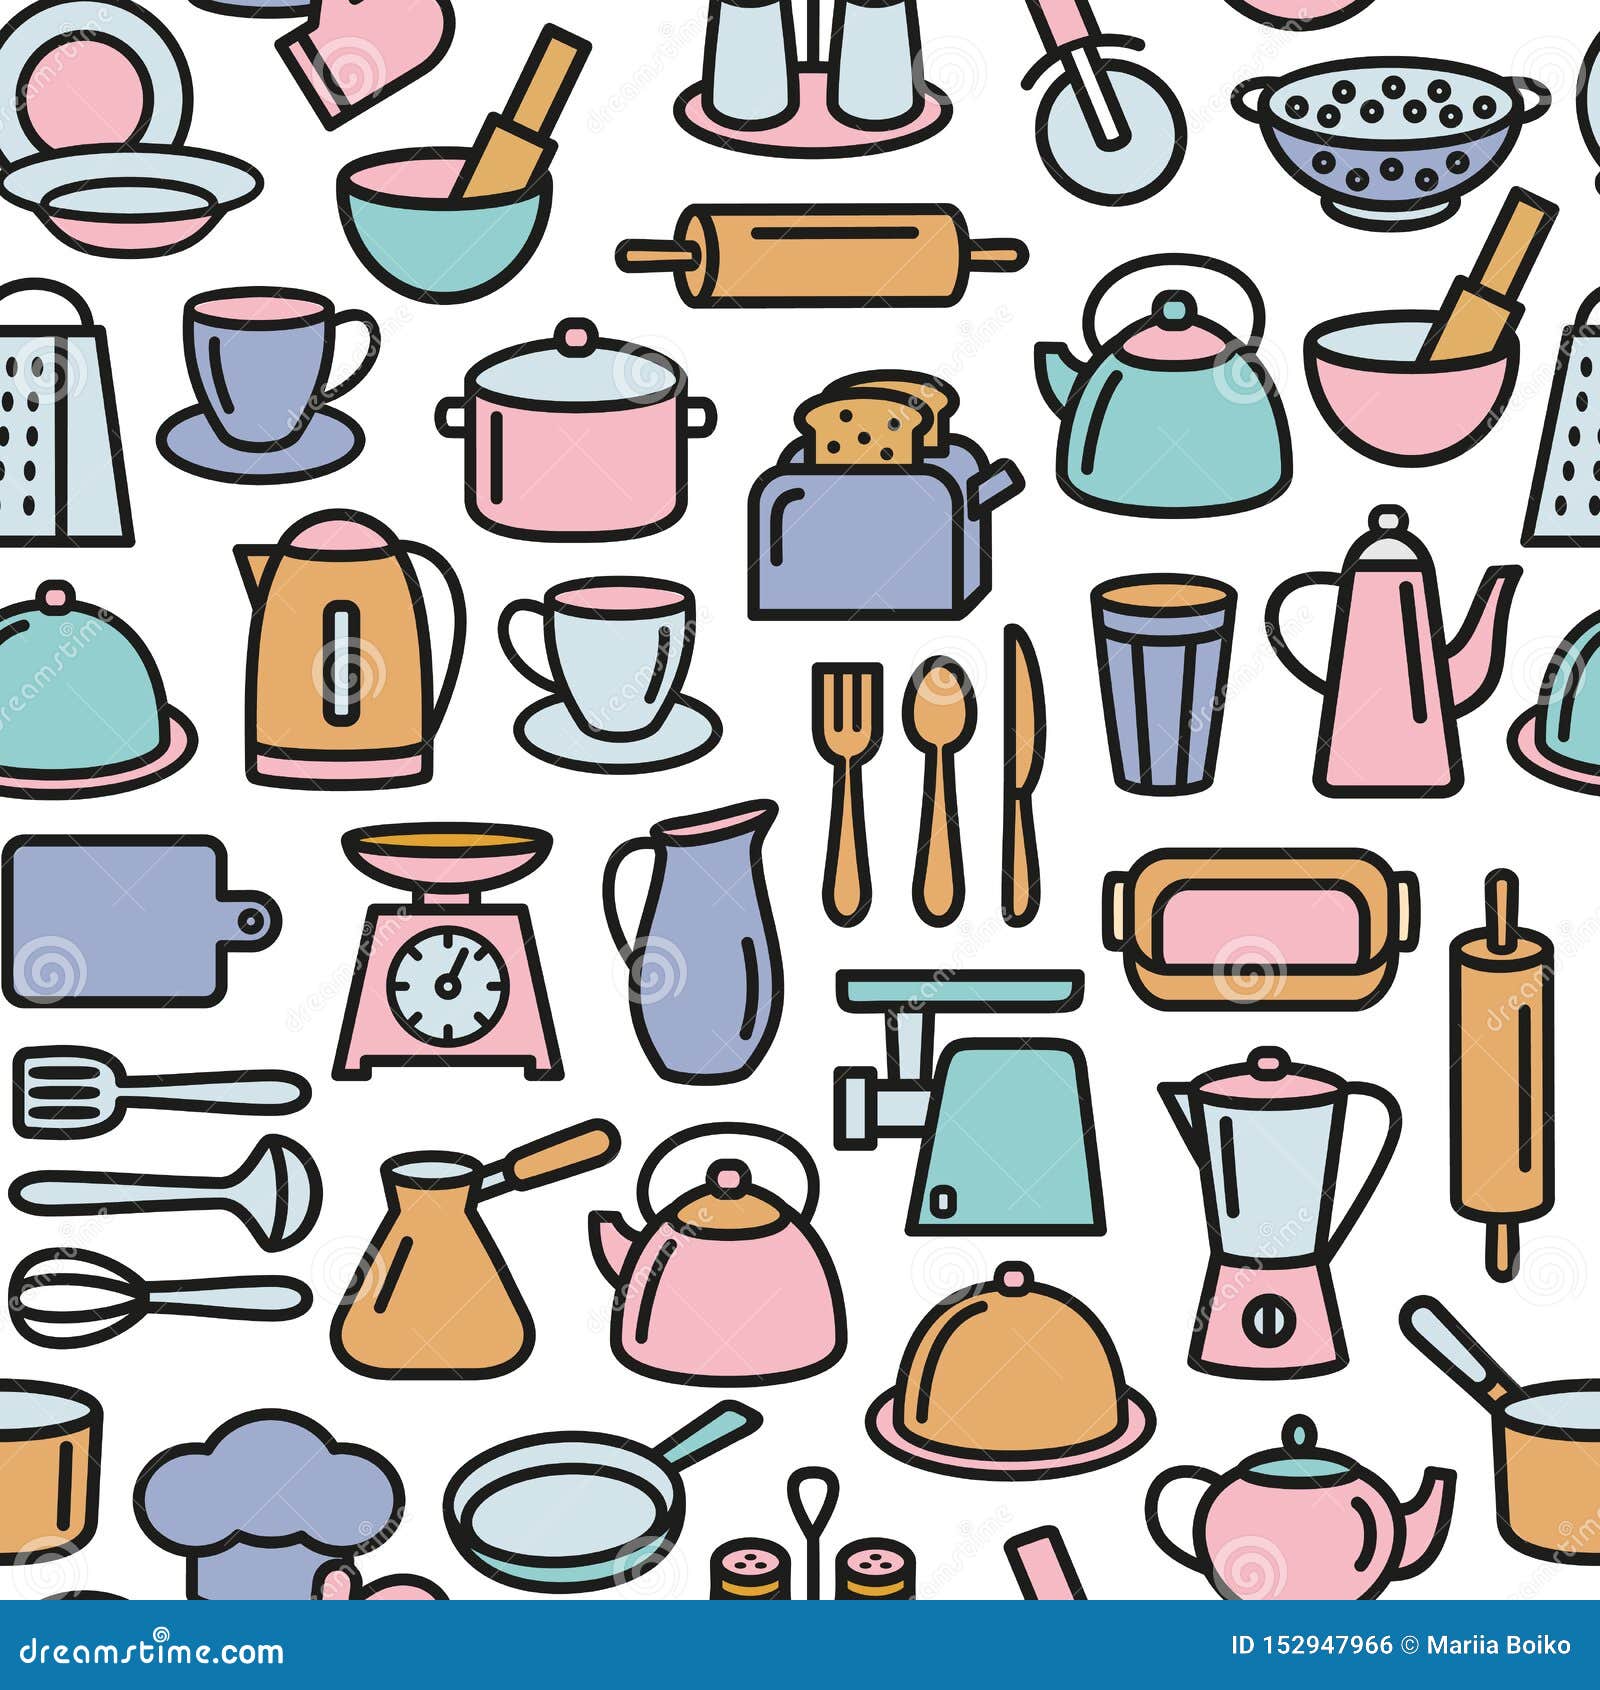 Seamless pattern with kitchen utensils. Cooking tools for home and